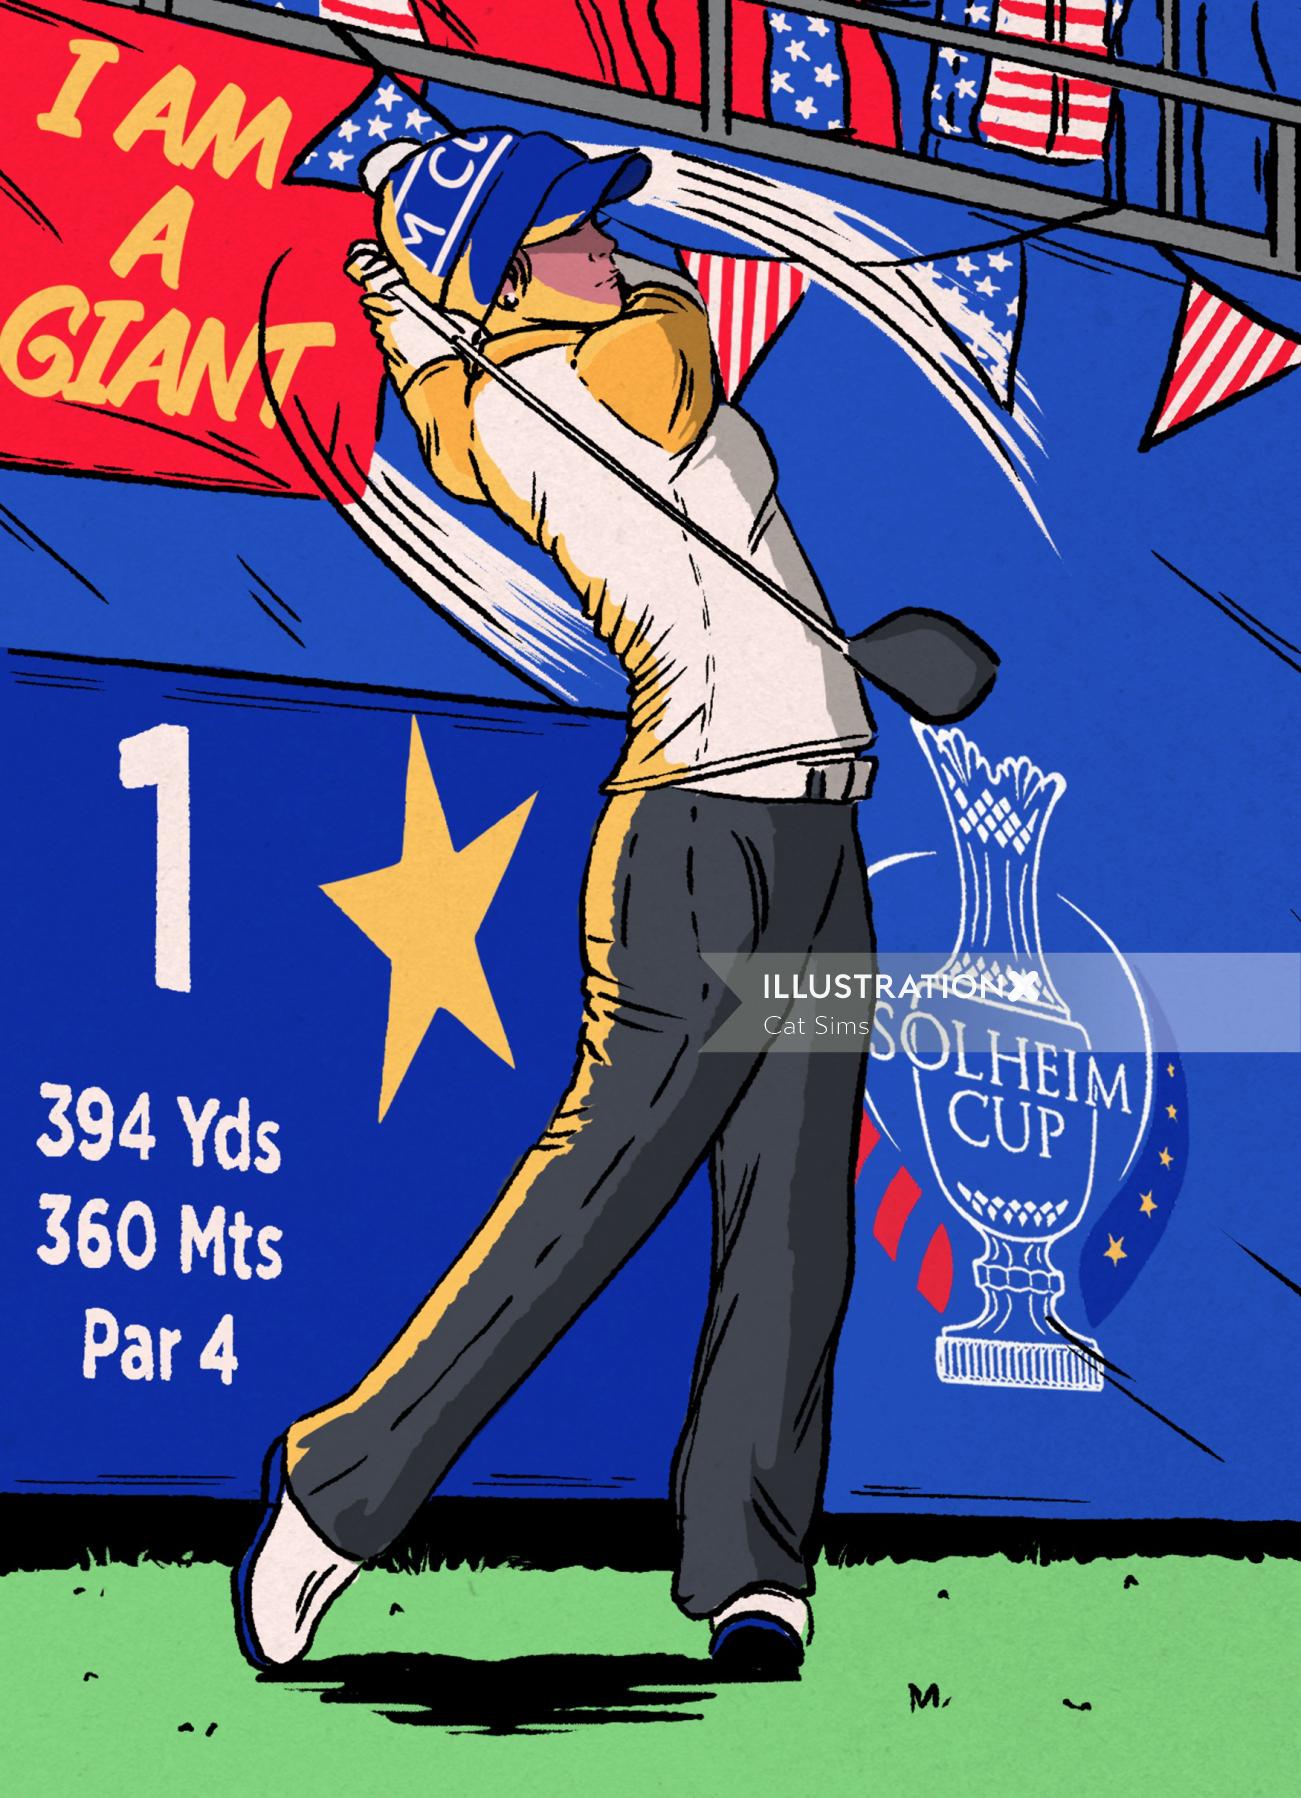 Graphic man with golf shot in championship
